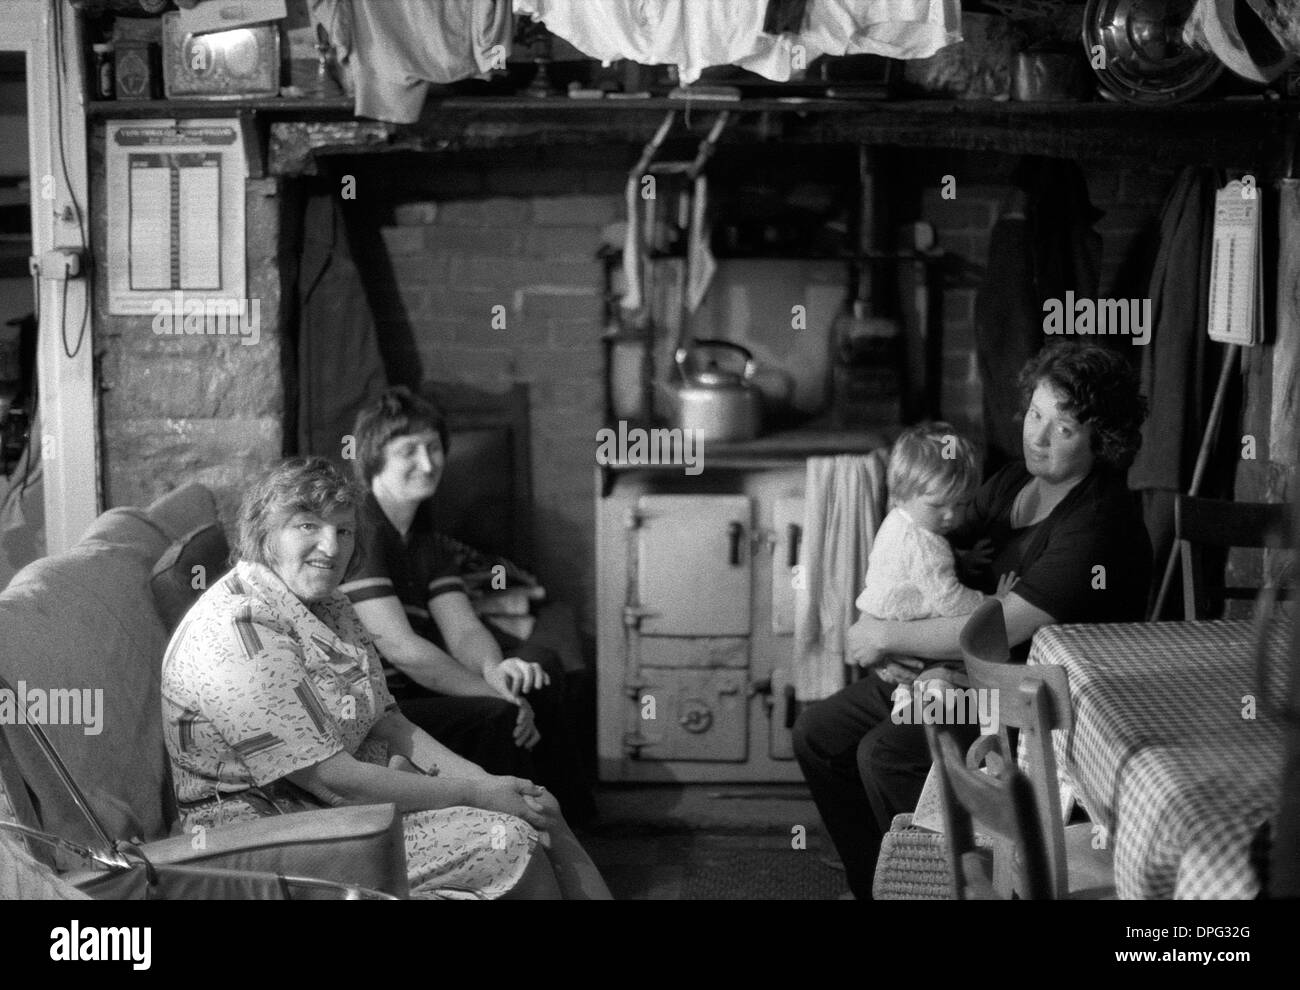 Welsh women family with child sitting together by the rayburn cooker in a kitchen at shearing time ready for sheep shearers to come in for dinner in Carmarthenshire Wales UK 1980s  KATHY DEWITT Stock Photo